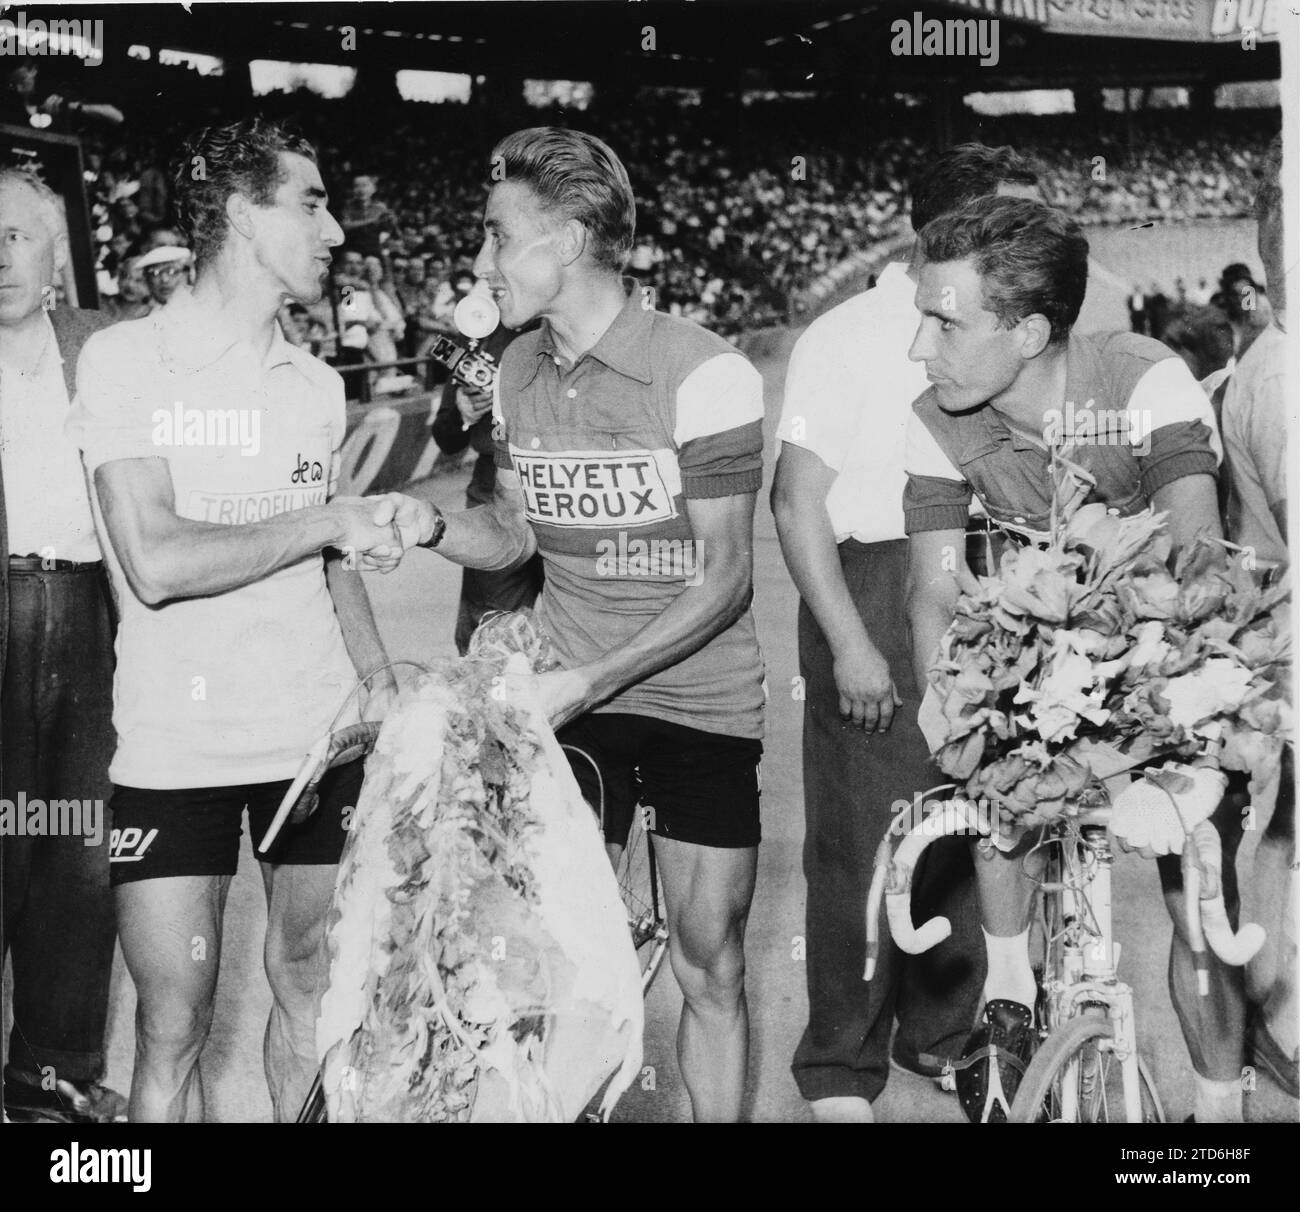 07/18/1959. At the exciting moment of arrival at the Parque de los Principes, Bahamontes receives congratulations from the famous cyclists of the French team Anquetil and Riviere. Credit: Album / Archivo ABC Stock Photo